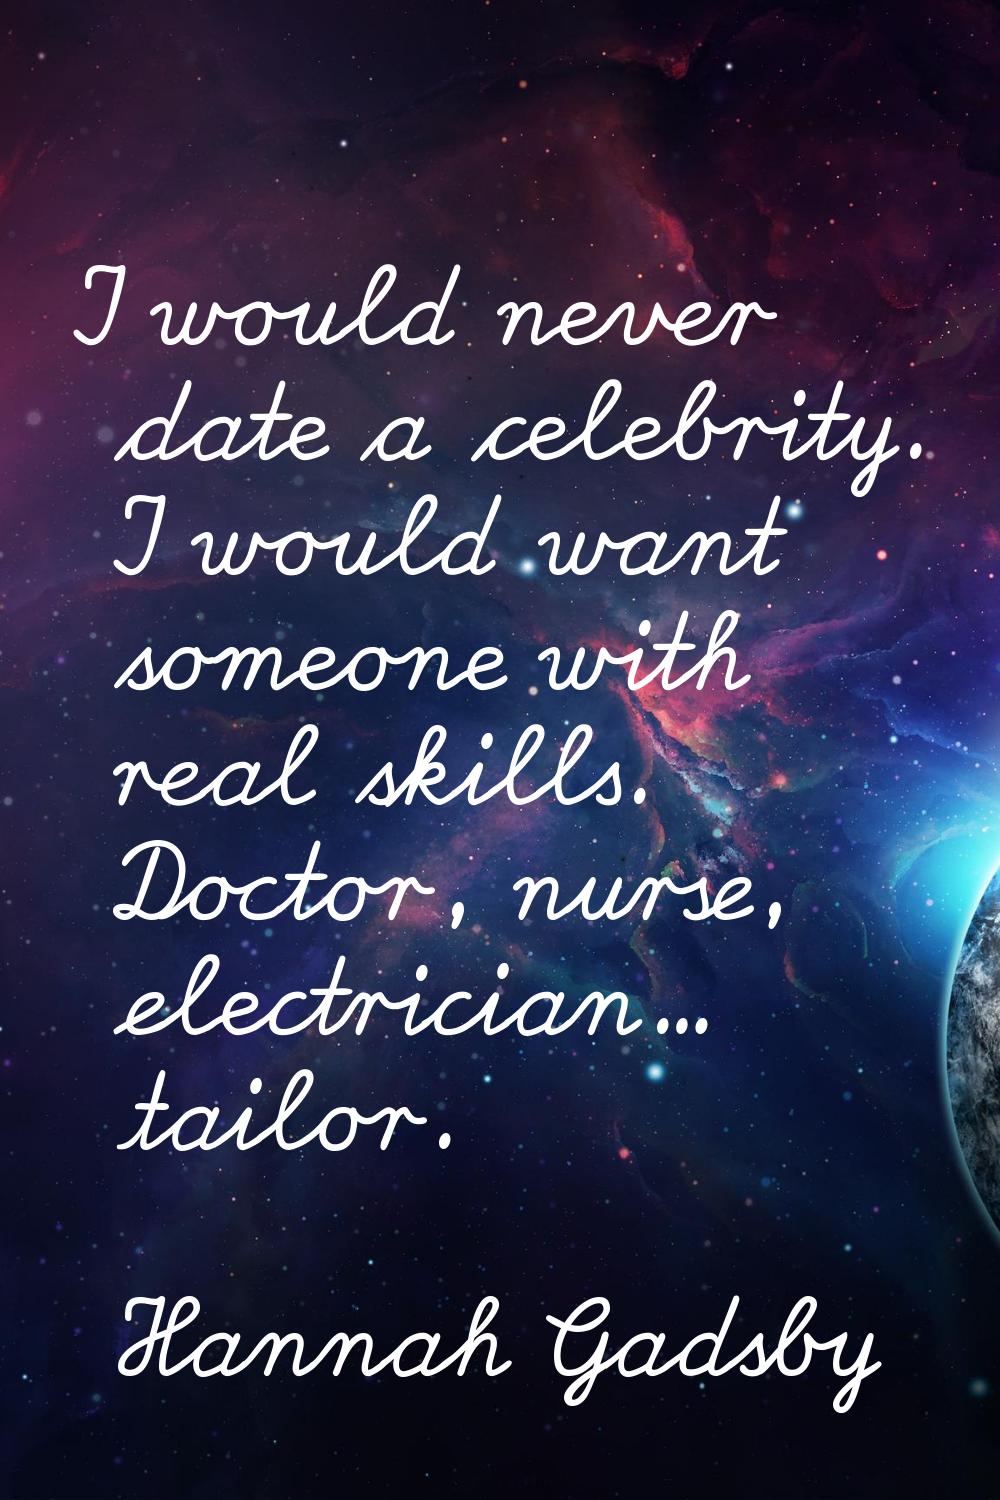 I would never date a celebrity. I would want someone with real skills. Doctor, nurse, electrician..